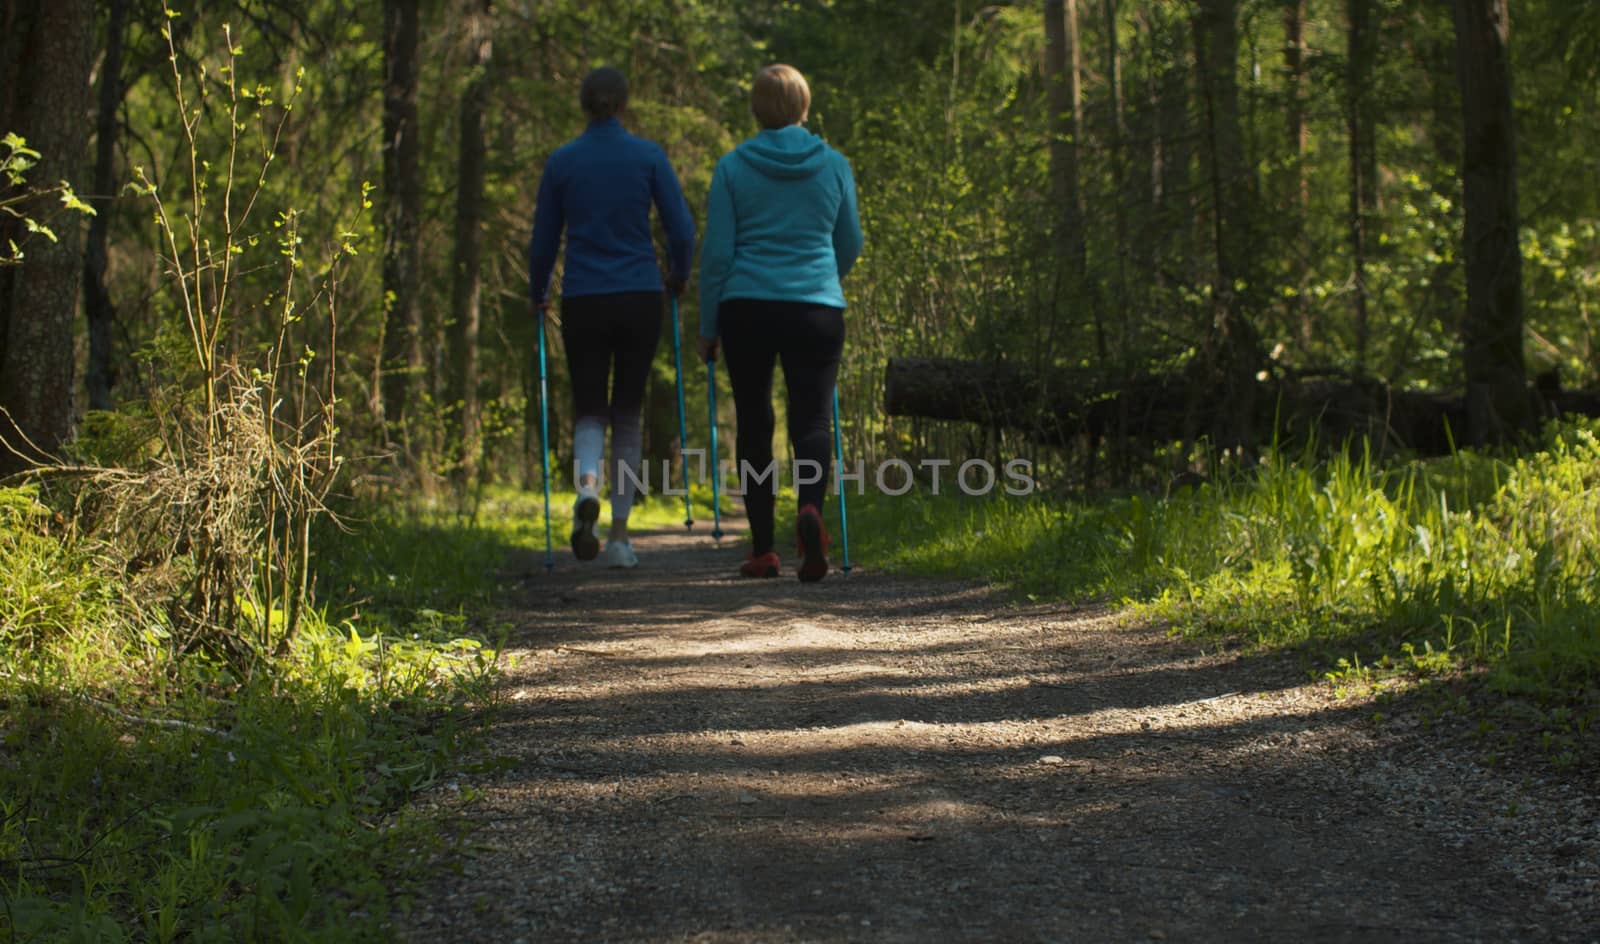 Women exercises in nordic walking in the forest with trekking poles by the dirt road. Rear view. Active and healthy lifestyle concept